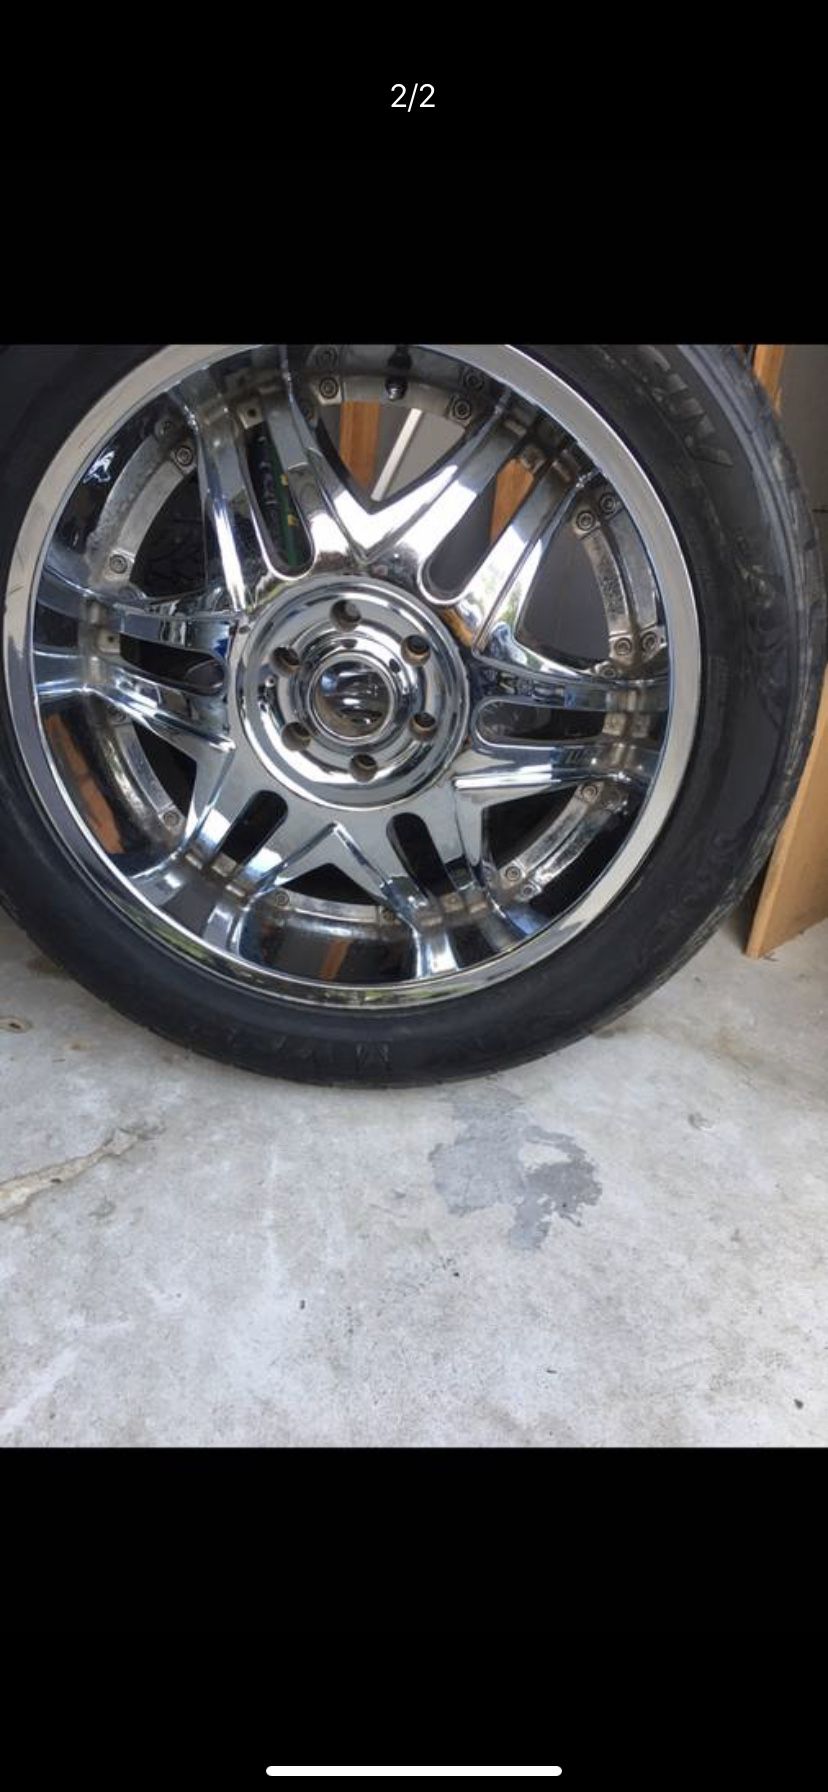 22” rims with wide profile tires with great tread